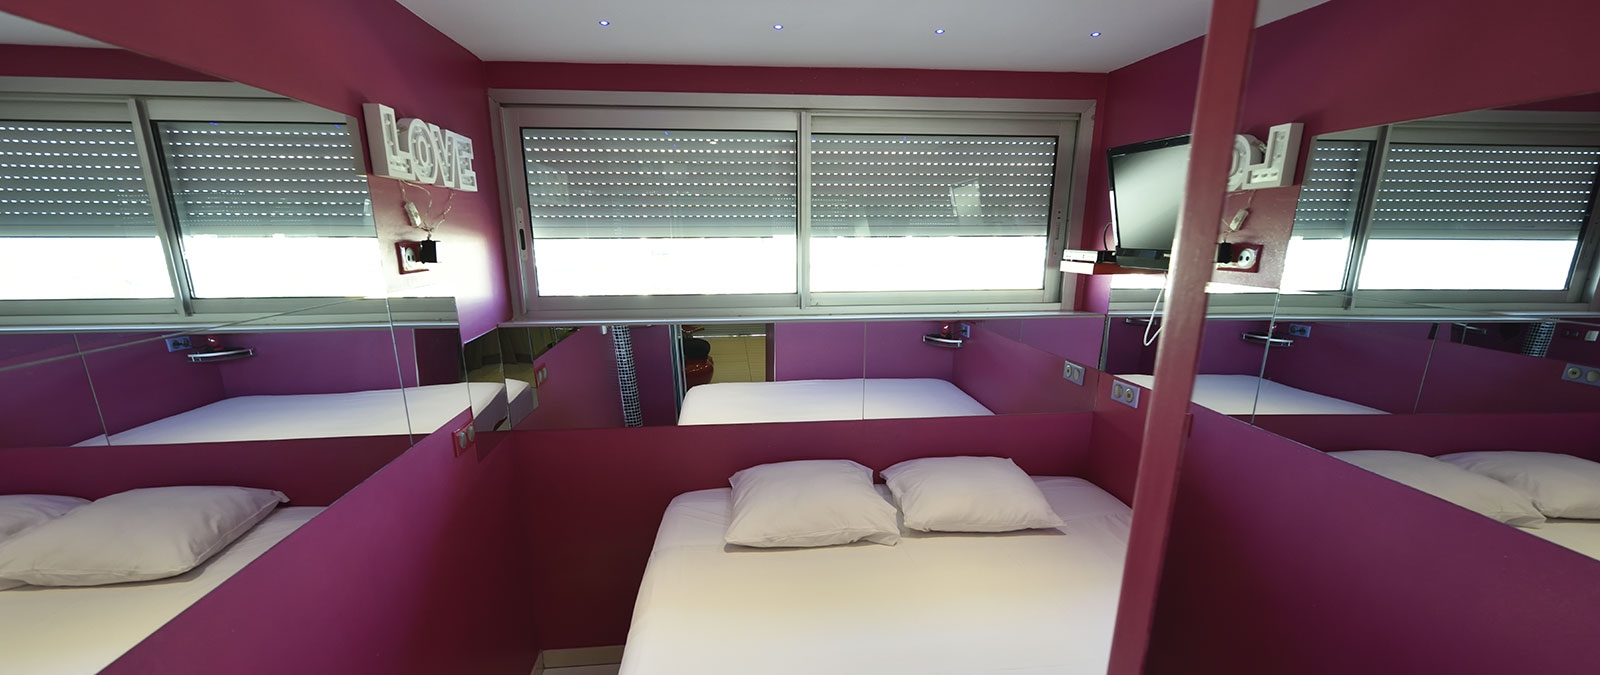 Bedroom with 180 cm double bed Amour Fou naturist studio flat rental